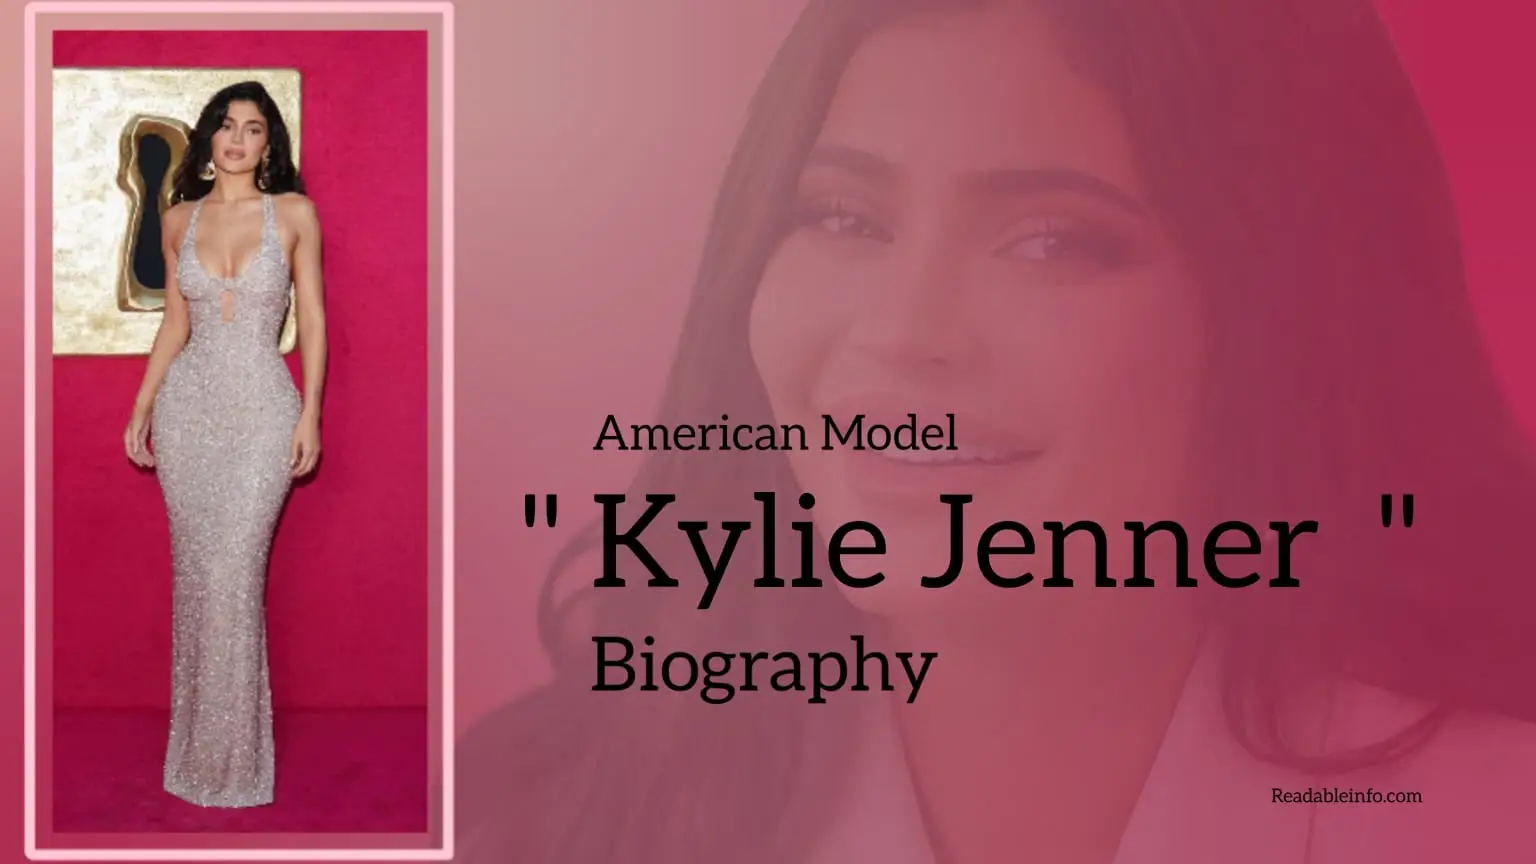 You are currently viewing Kylie Jenner Biography (American Model)